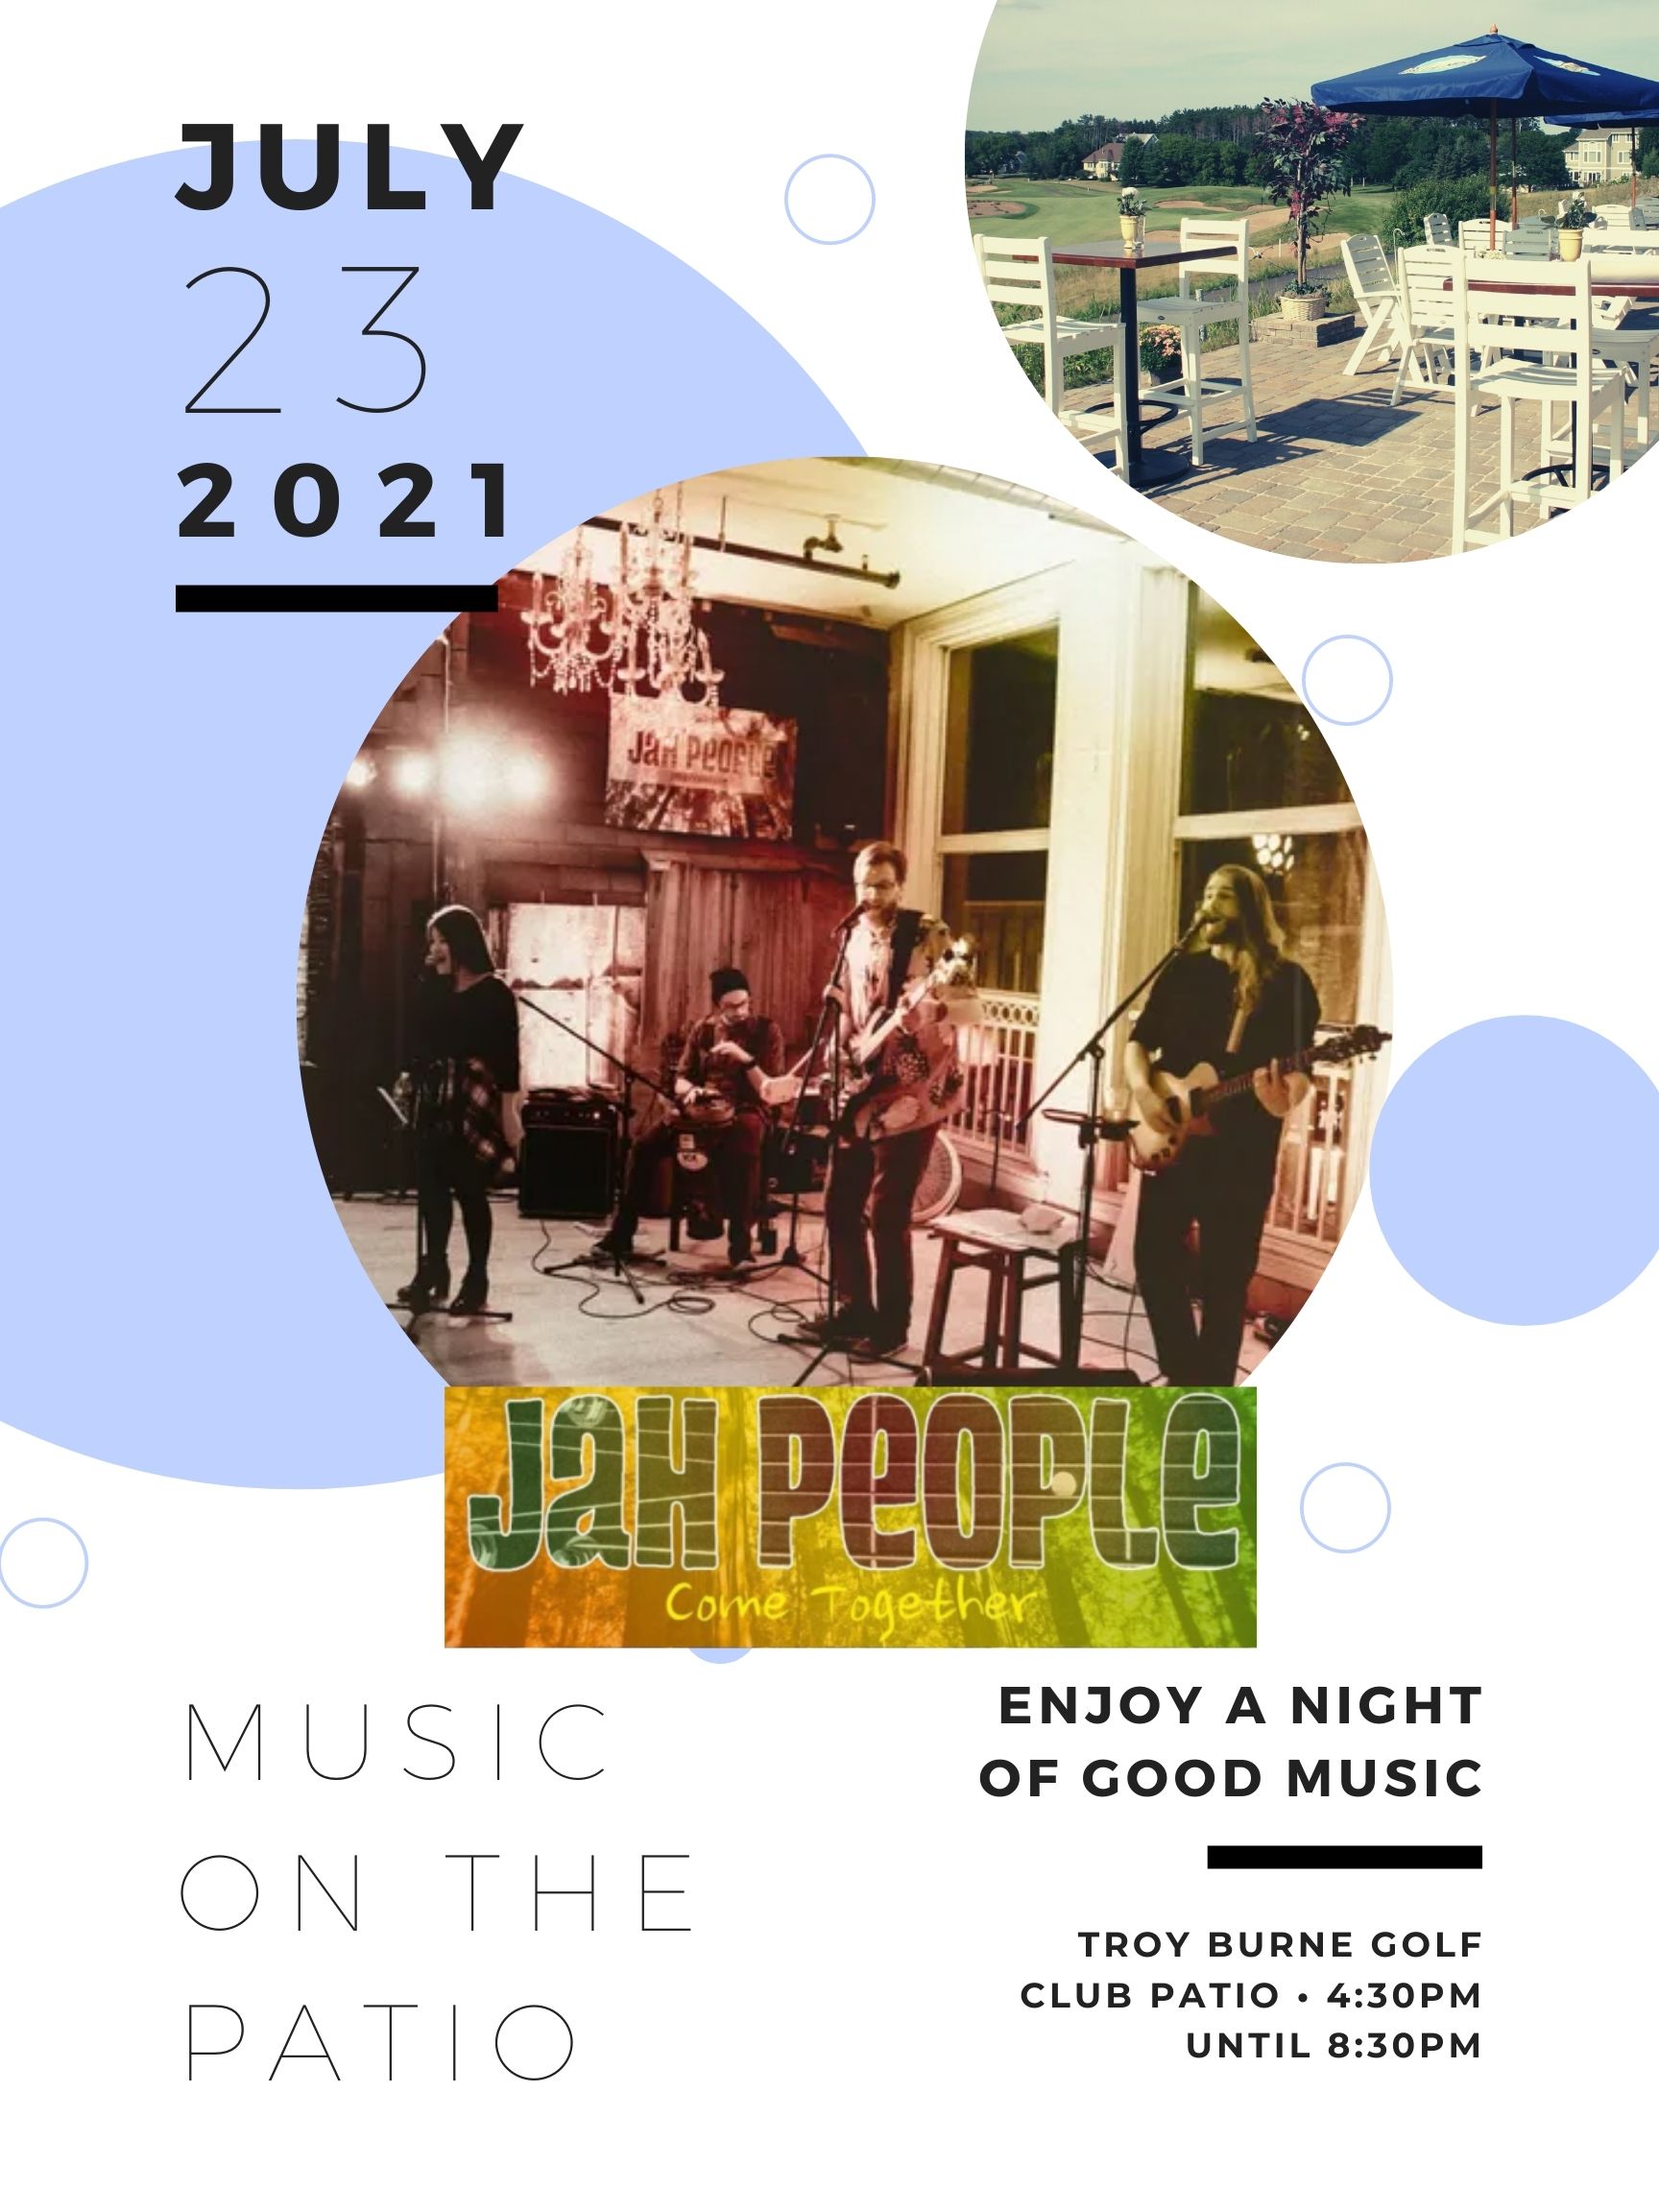 Music on the Patio JULY 23rd